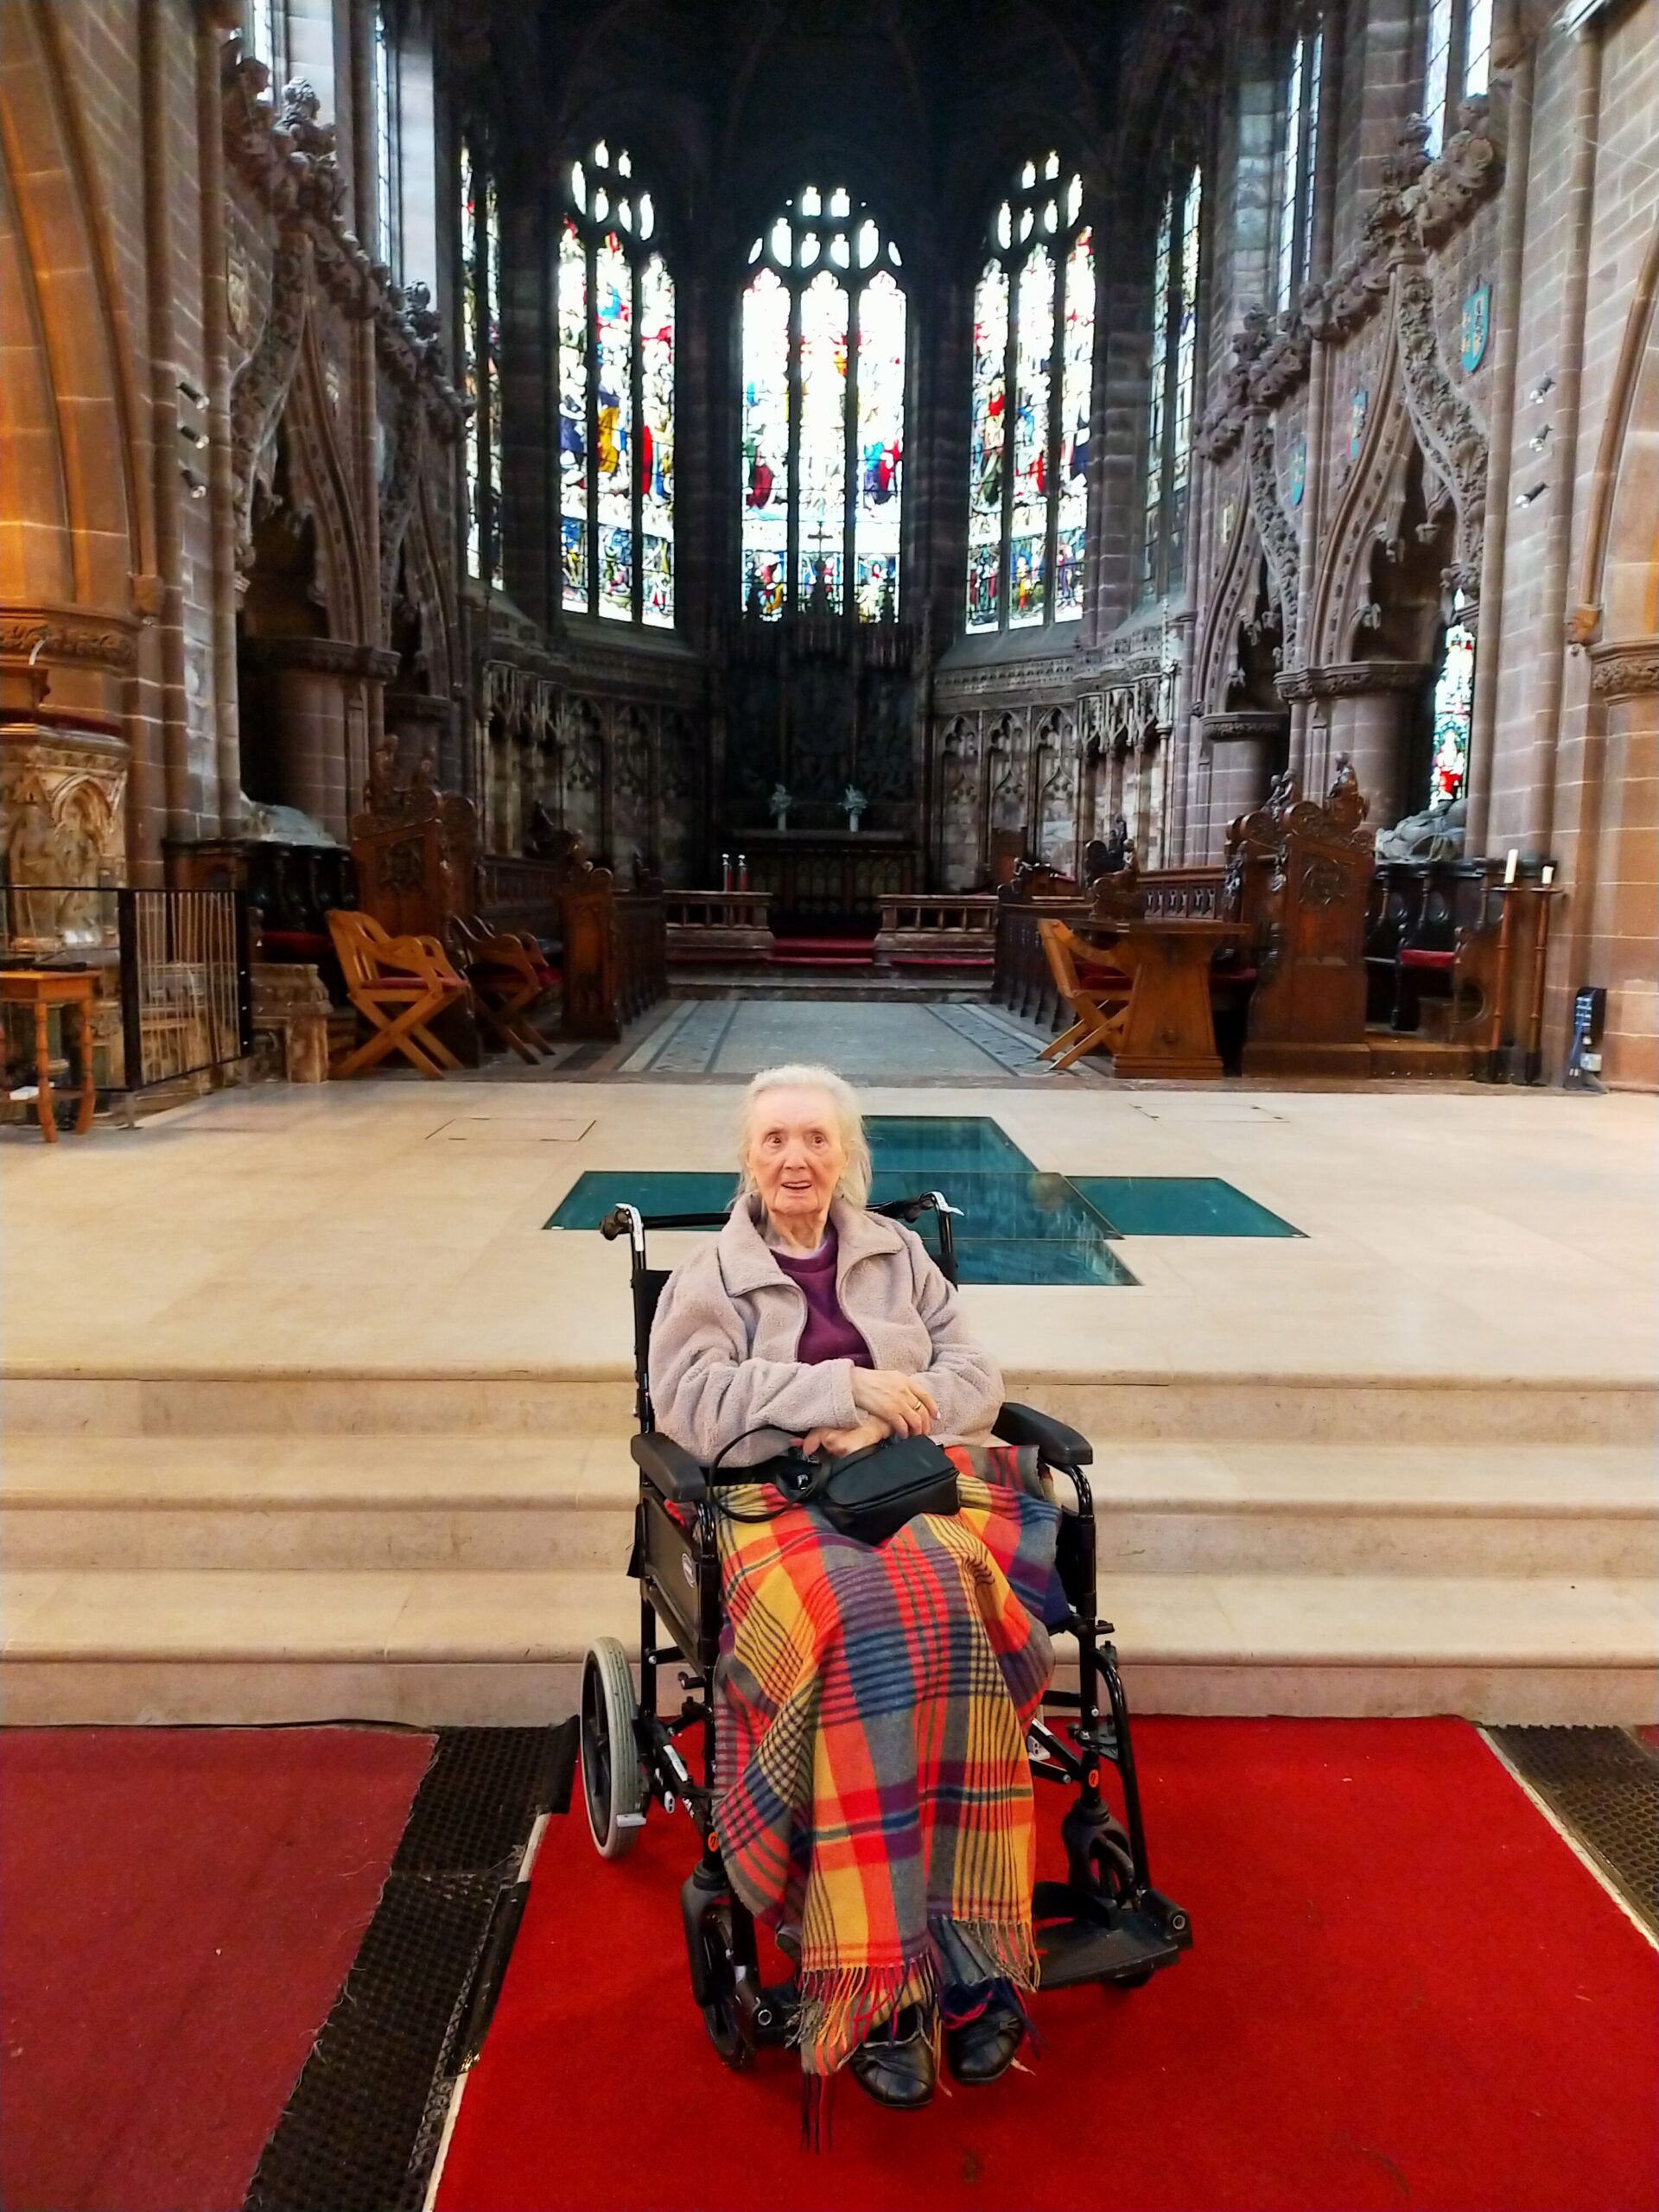 A female resident in a wheelchair, covered in a bright patterned blanket in a Cathedral.